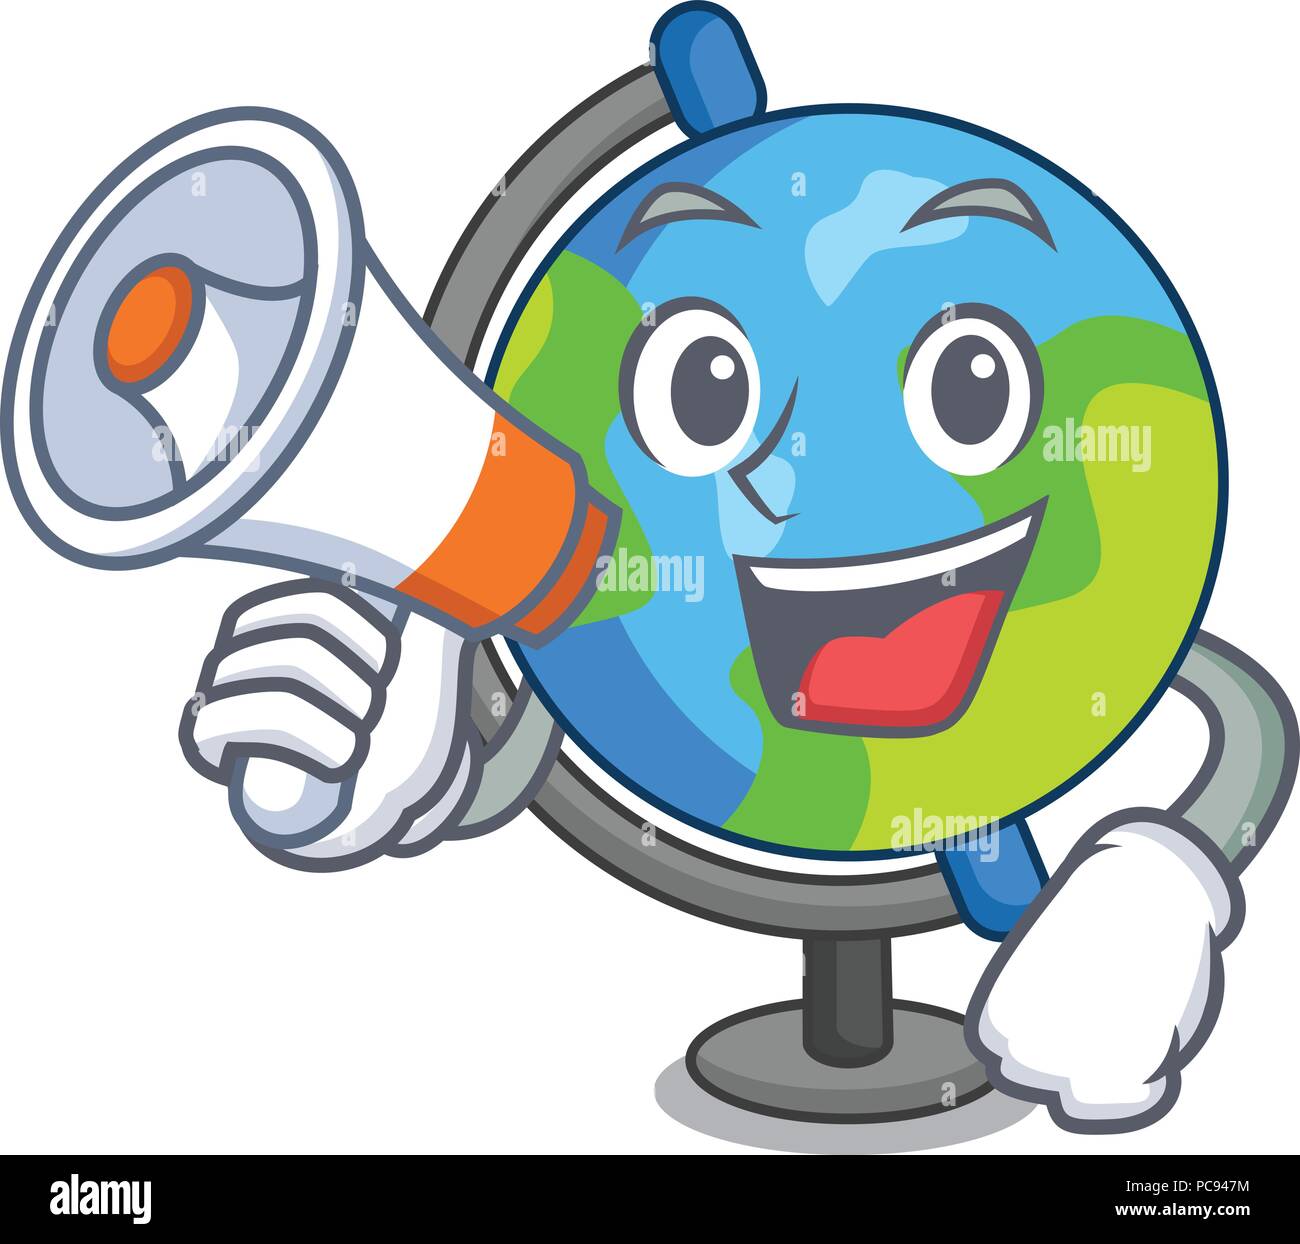 With megaphone globe character cartoon style Stock Vector